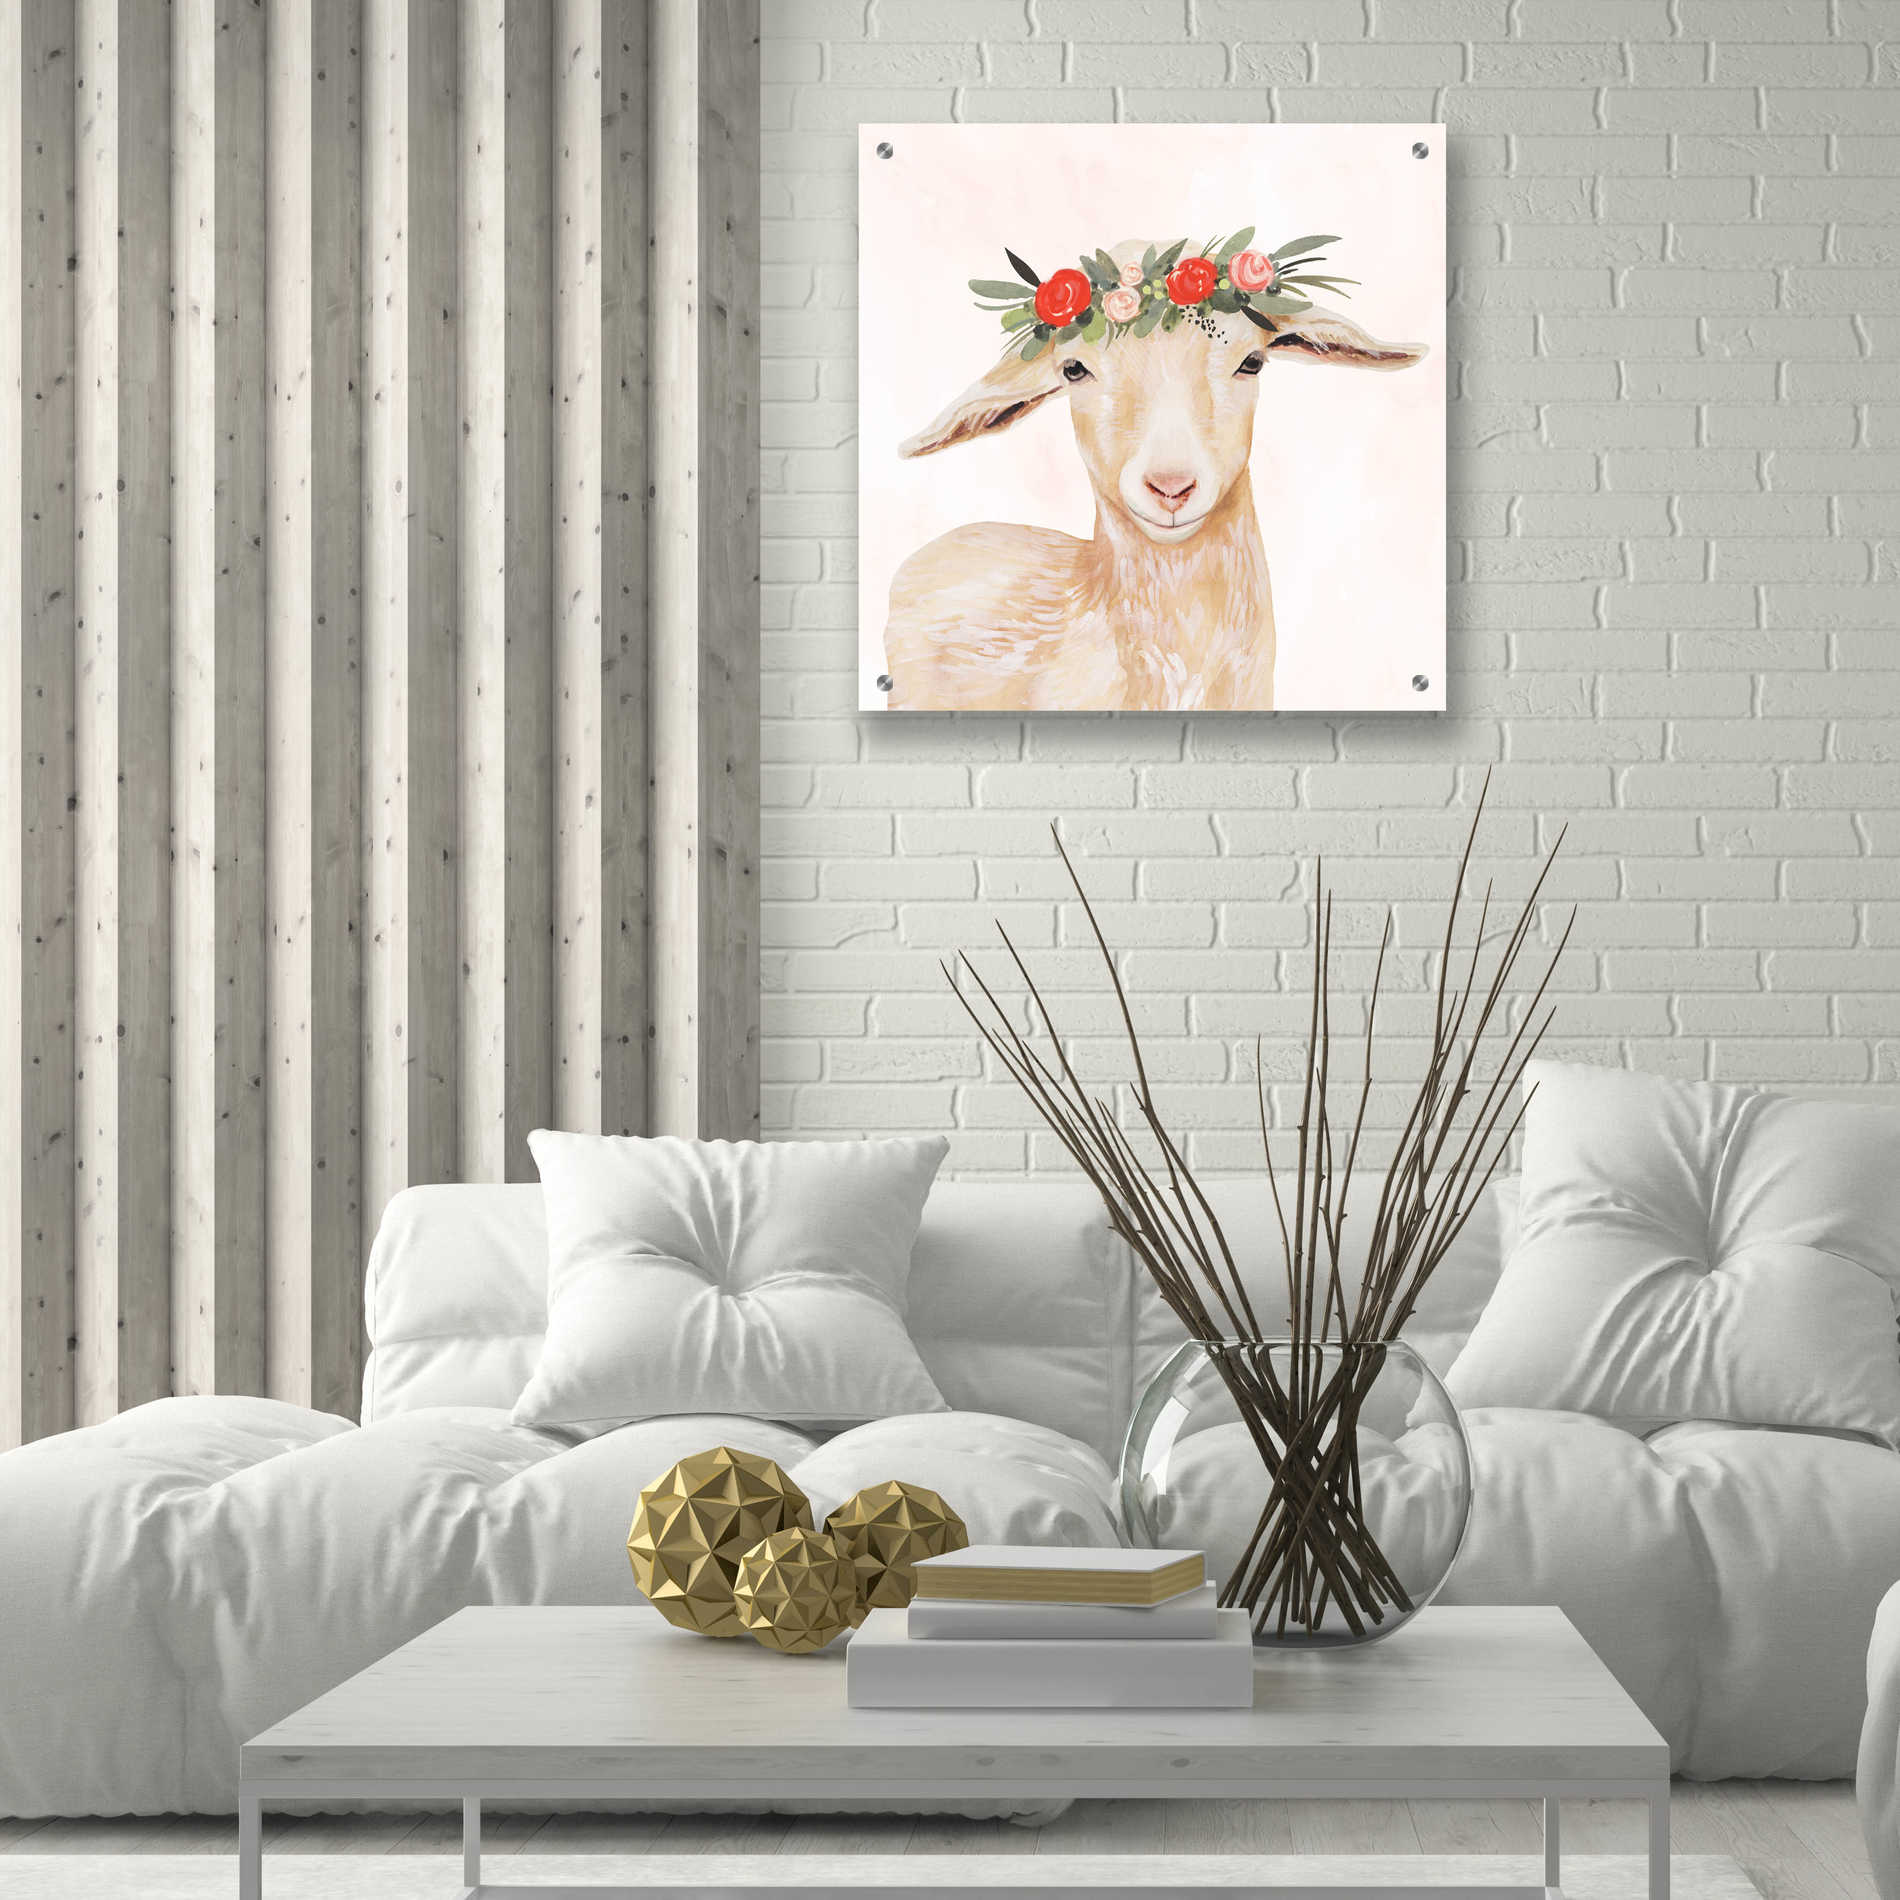 Epic Art 'Garden Goat I' by Victoria Borges, Acrylic Glass Wall Art,24x24